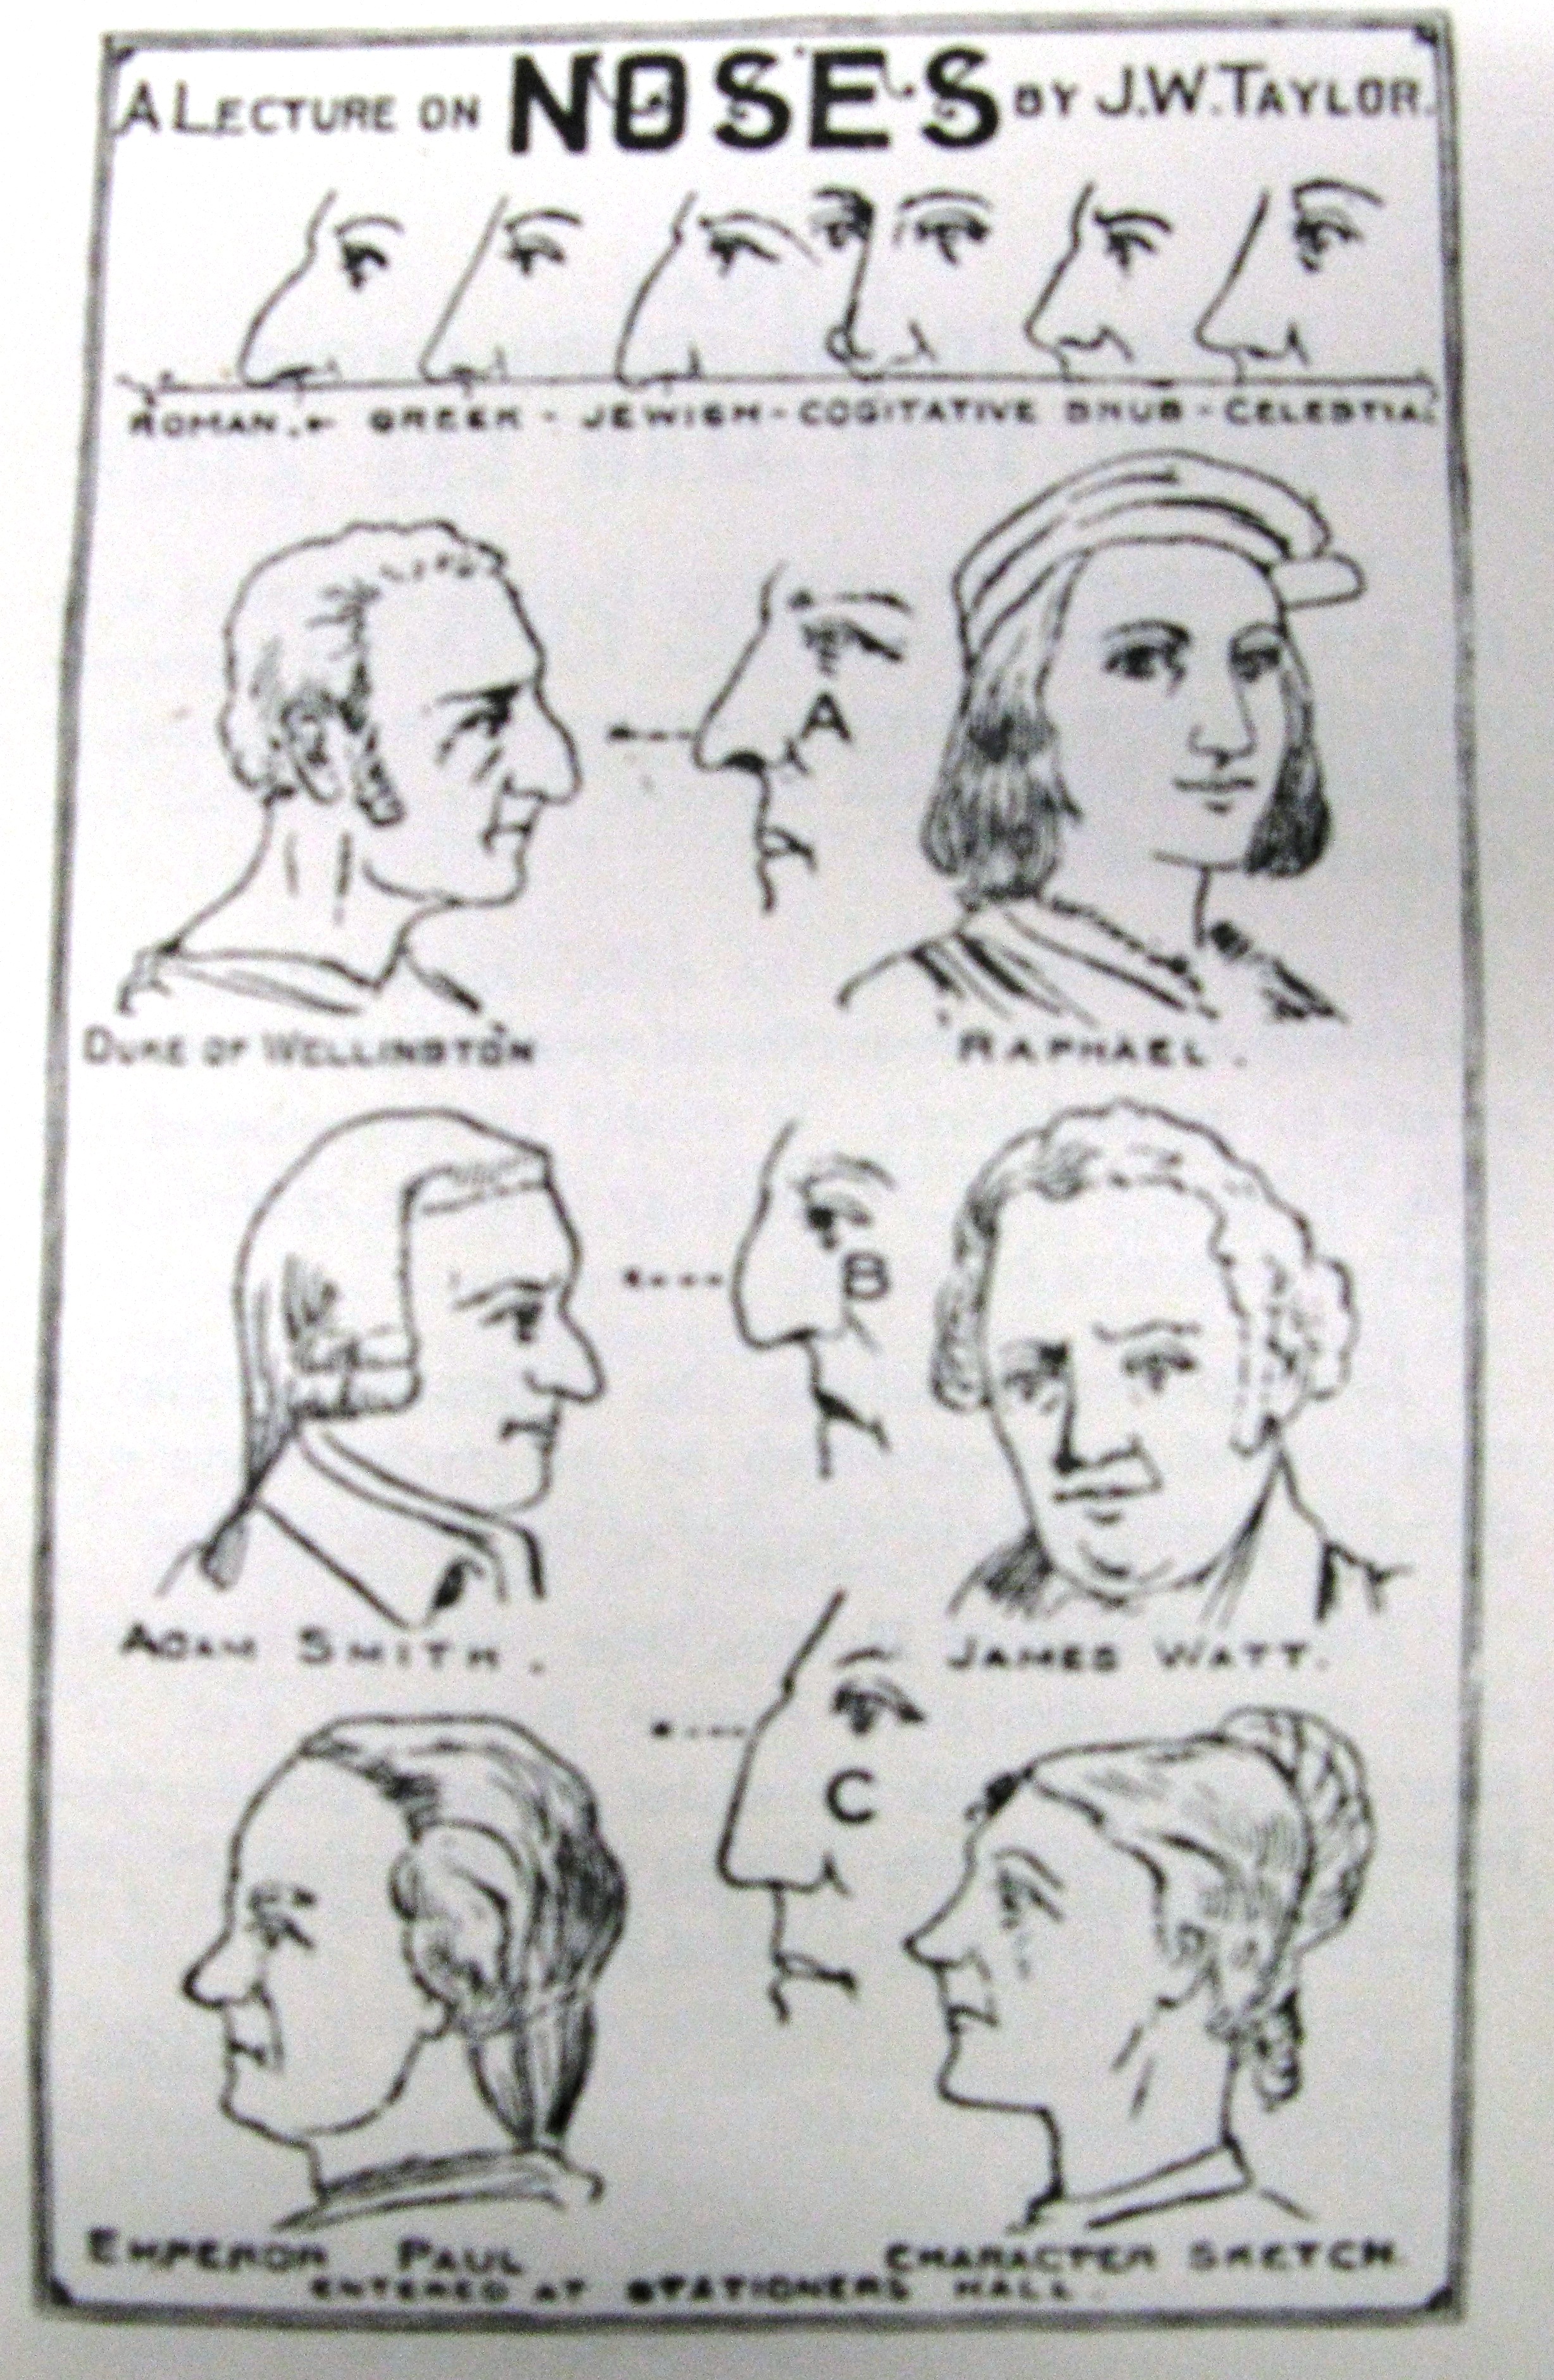 Examples of noses